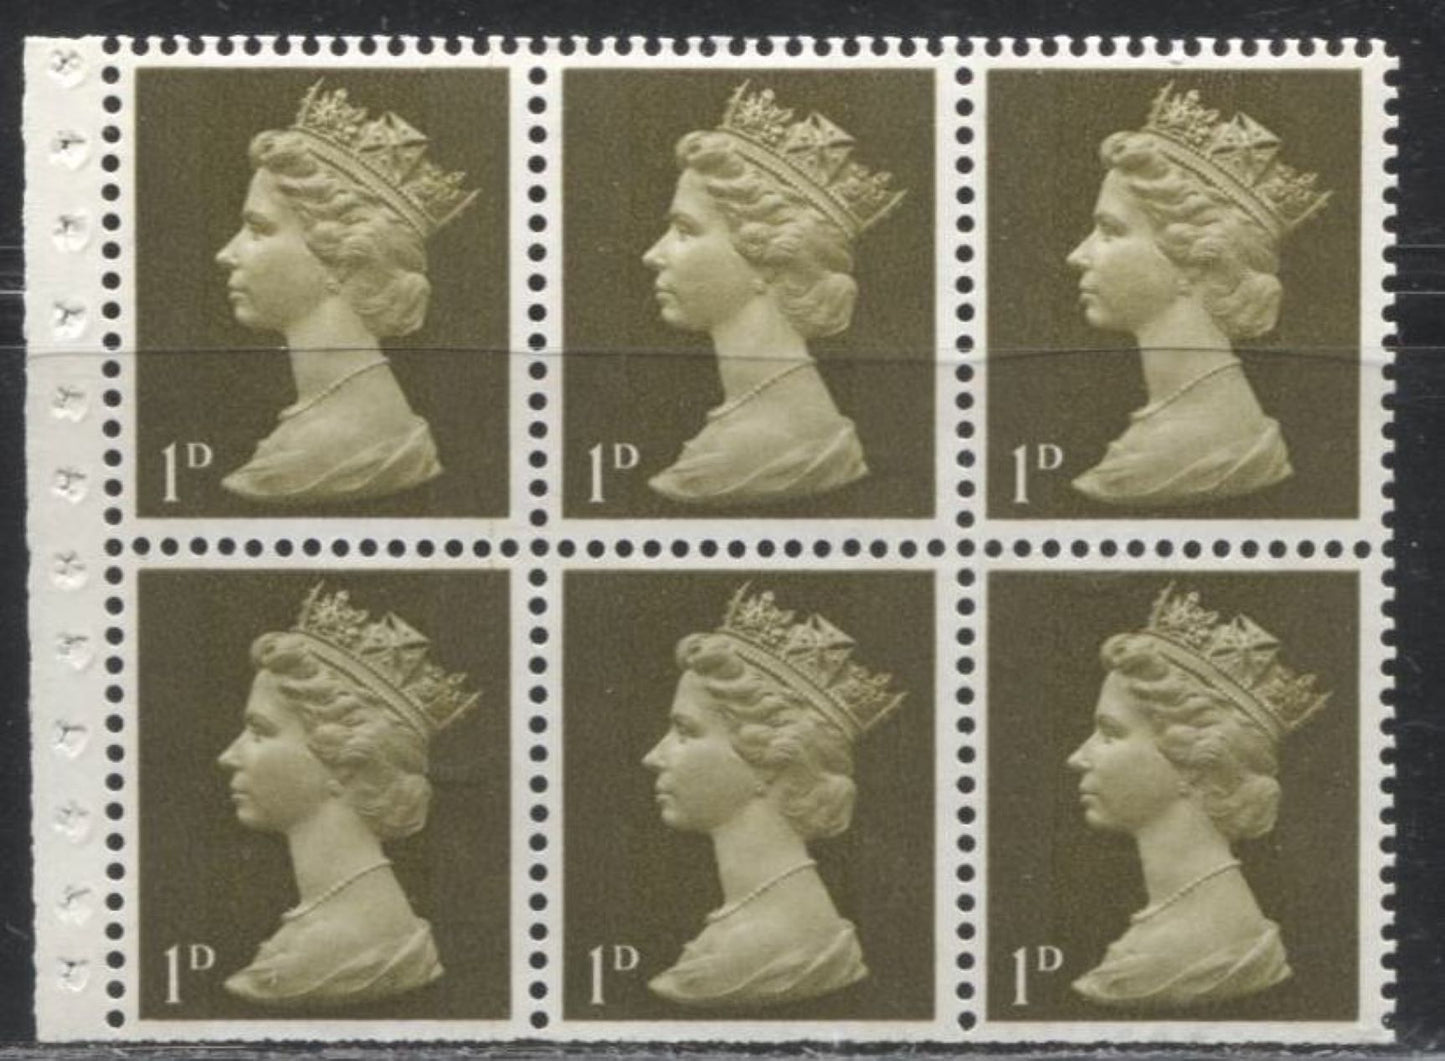 Great Britain SG#LP50 4/6d- Black on Grey Blue 1967-1971 Pre-Decimal Machin Heads Issue, A Complete Booklet From March 1969, Various Fluorescence Levels For Interleaving Pages (Combination B), Medium Fluorescent "Sirius" Cover